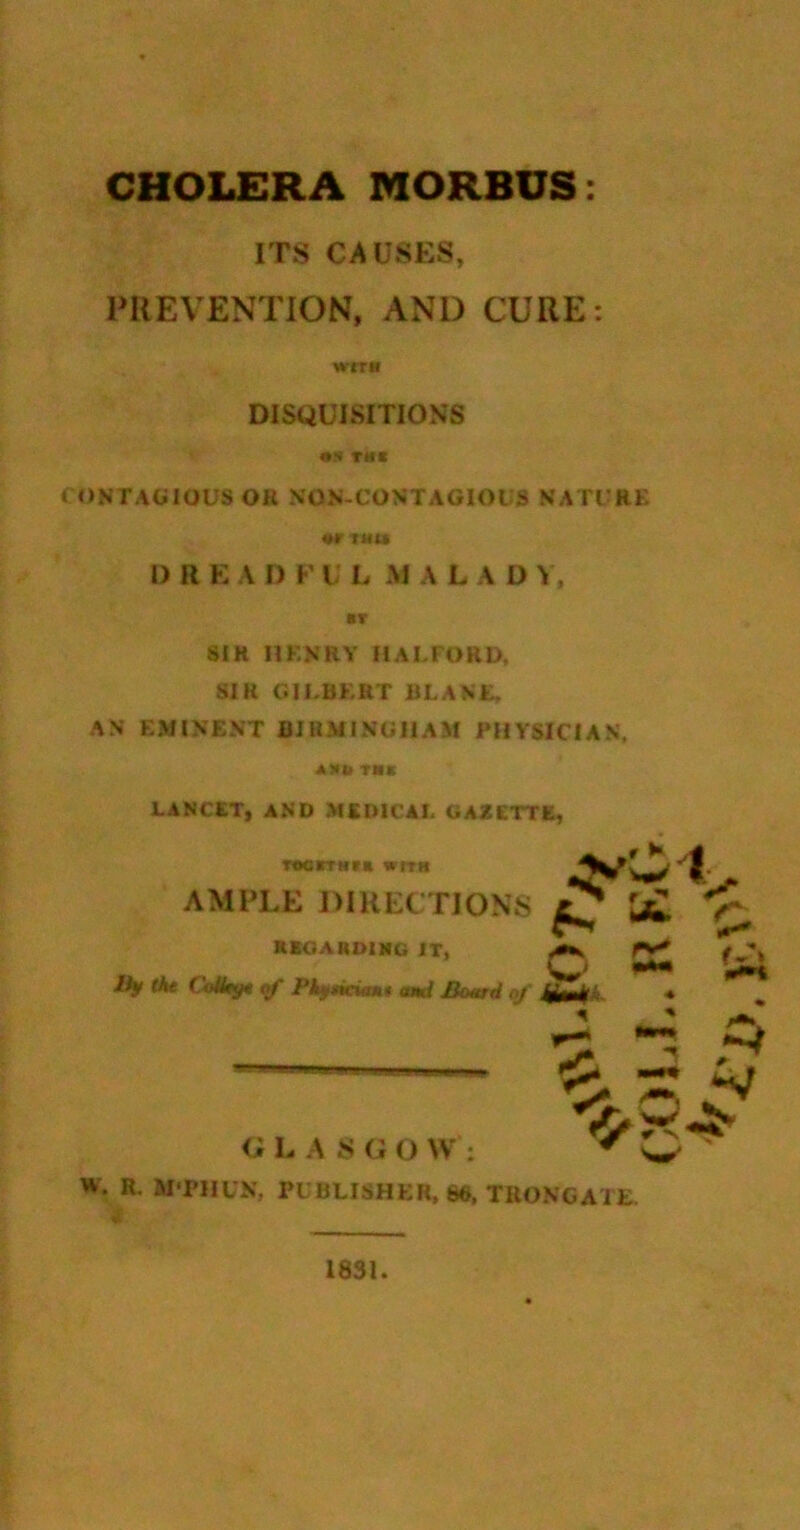 CHOLERA MORBUS: ITS CAUSES, PREVENTION, AND CURE: J ONTAGIOUS OR NON-CONTAGIOI S NATGRK 1> R E A D F i; L M A L A D \ , SIR HKNRY HALFORD, SIR GILBKRT BLANK, AN EMINENT BlHMINUliAM PHYSICIAN, A)*i( me LANCET, AND MEDICAL GAZETTE, T«orrNt« wfTH AMPLE DIRECTIONS ^ k*. ^ KBGARDIMG IT, ^ rv^ Ikf At C«4^ Pkjf^dtmt ami JBoitrd of *■ ^ W. R, WPHUN, PUBLISHER, S6. TRONCATE. DISQUISITIONS <; L A S G O W ; 1831